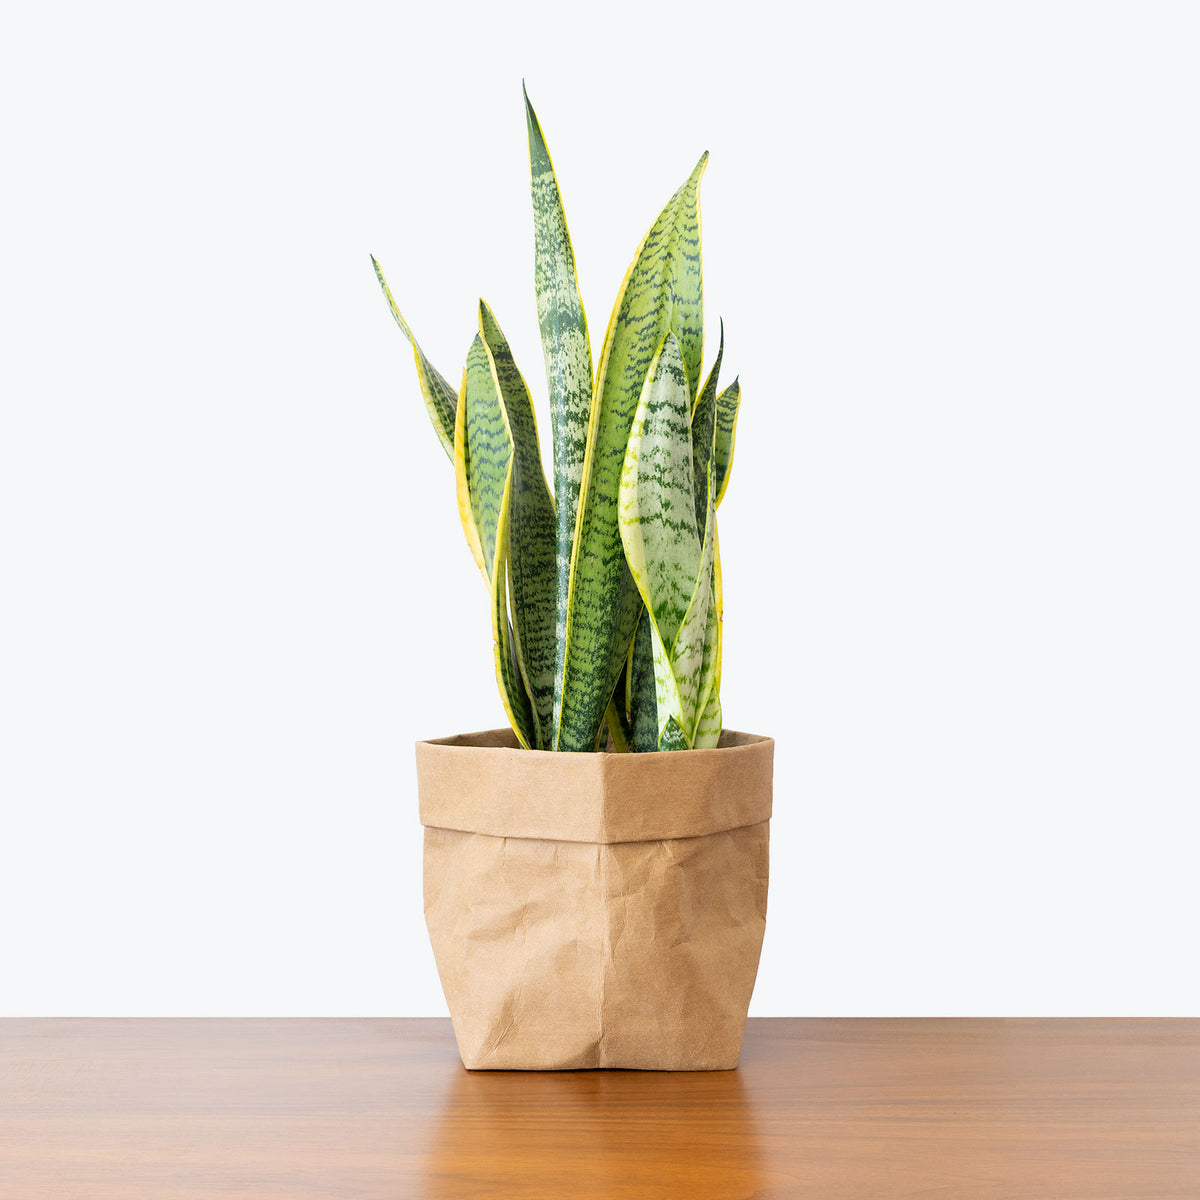 Sansevieria Laurentii - Top 10 Best Housewarming Plant Gifts for New Home Owners - House Plants Delivery Toronto - JOMO Studio